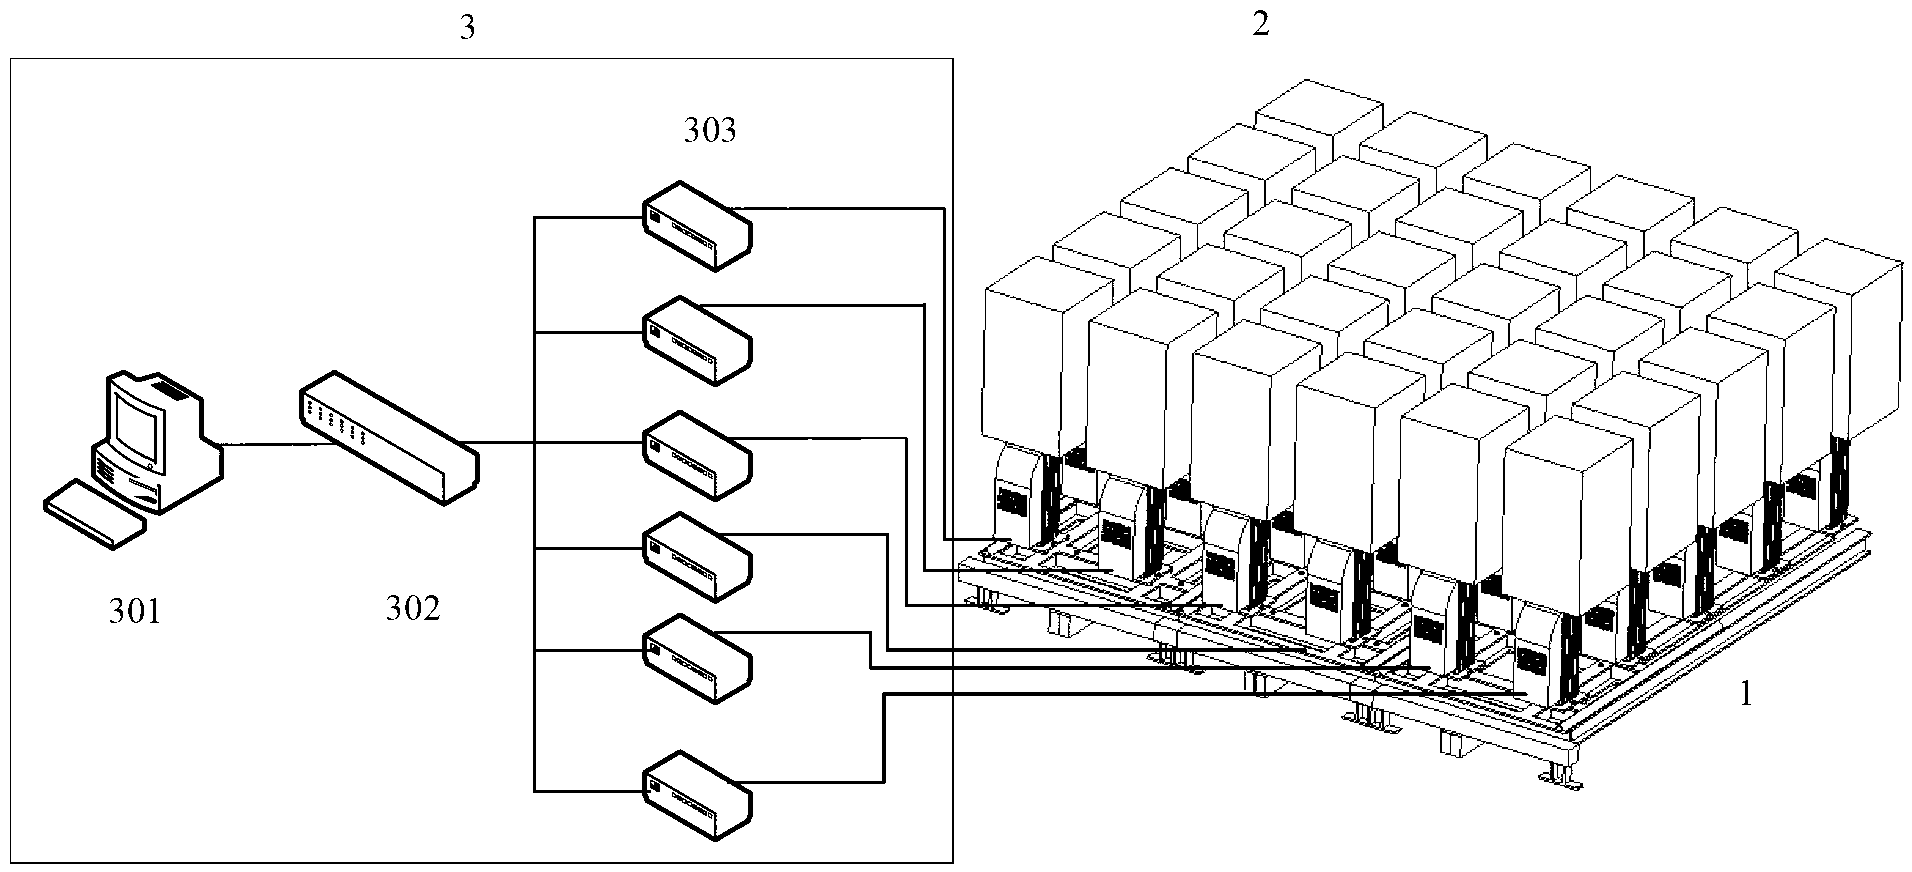 Three-dimensional dynamic mechanical performing system with changeable contents